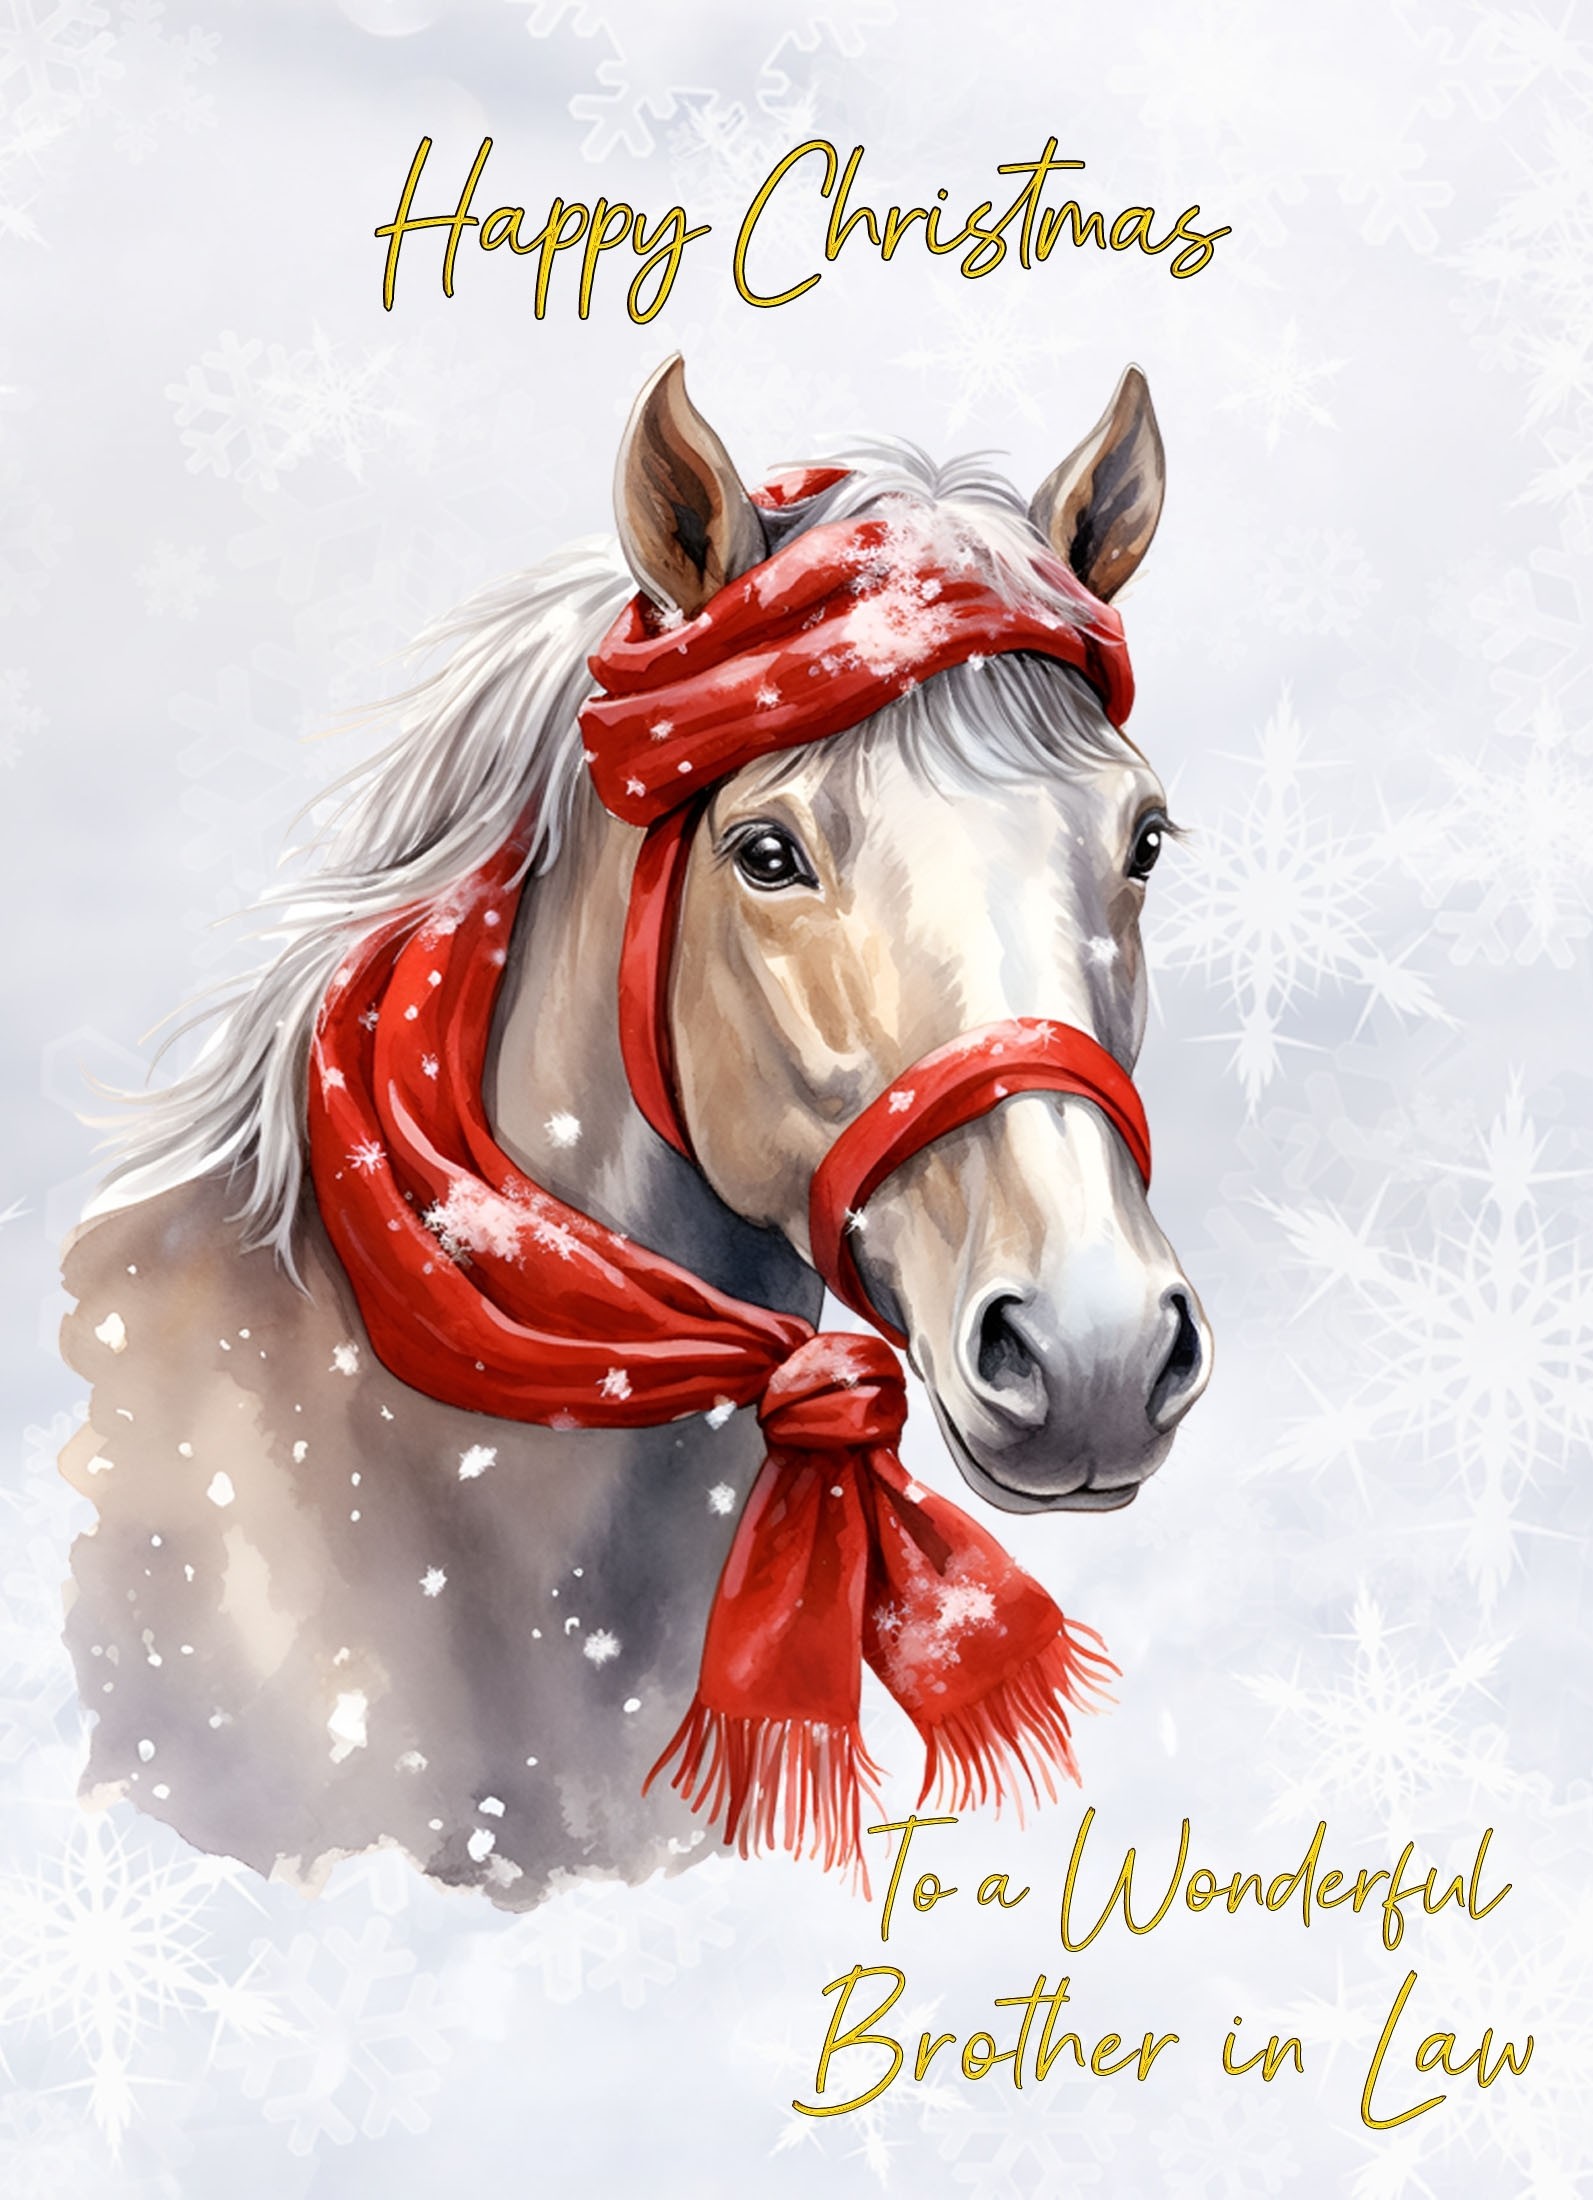 Christmas Card For Brother in Law (Horse Art Red)